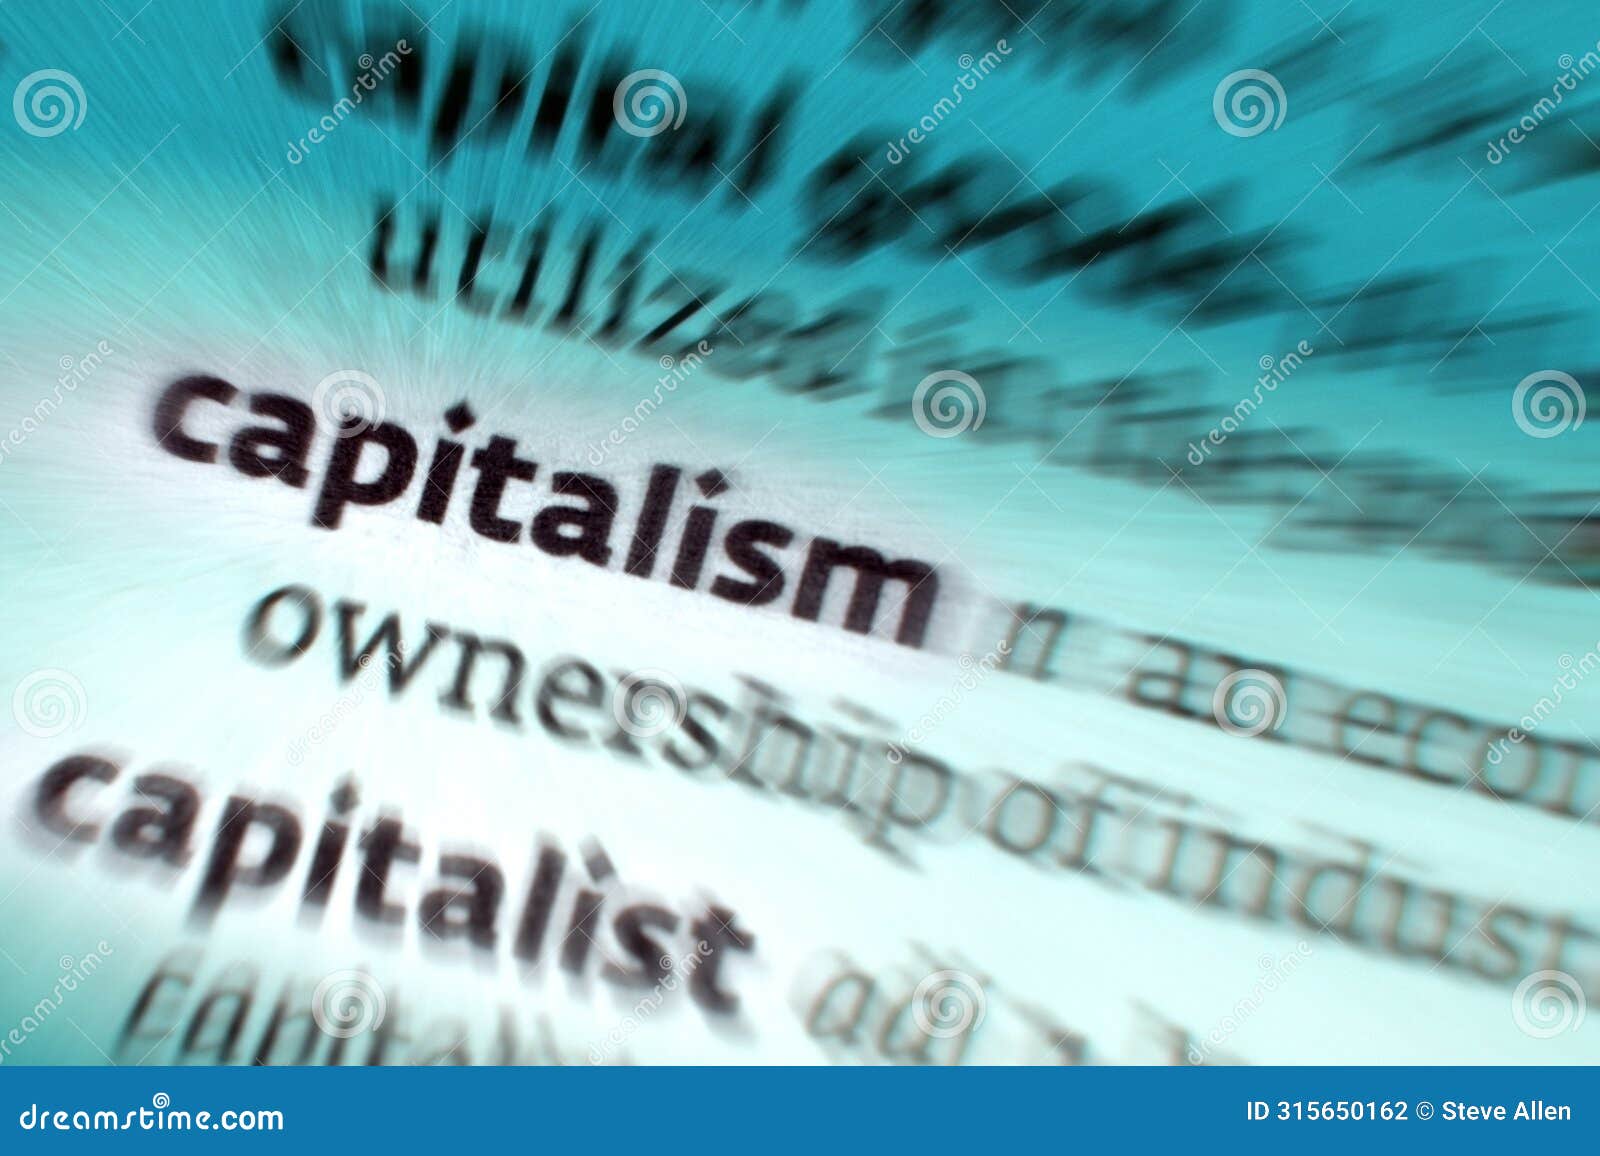 capitalism - an economic and political system